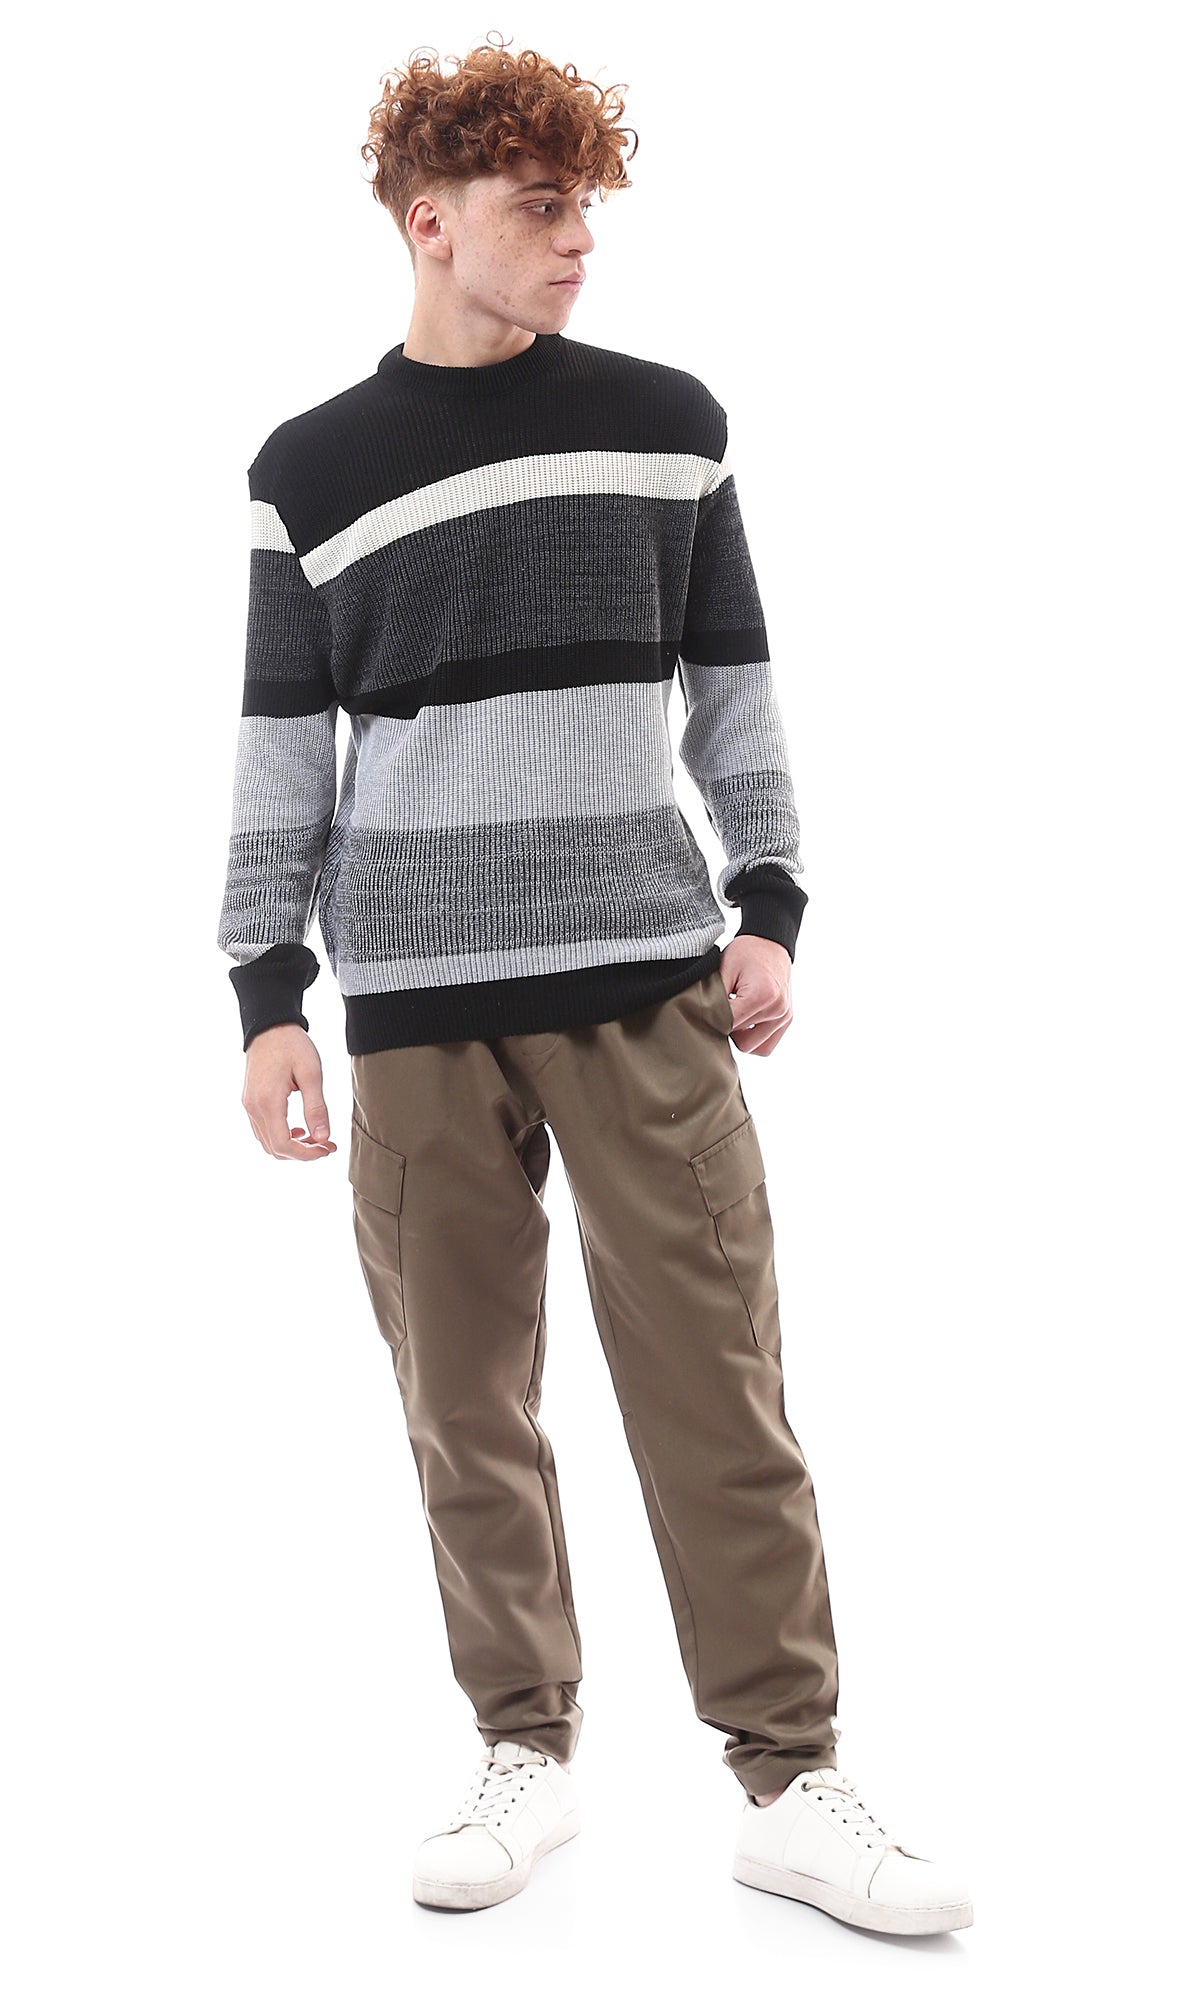 O173598 Heather Grey & Black Knitted Slip On Pullover